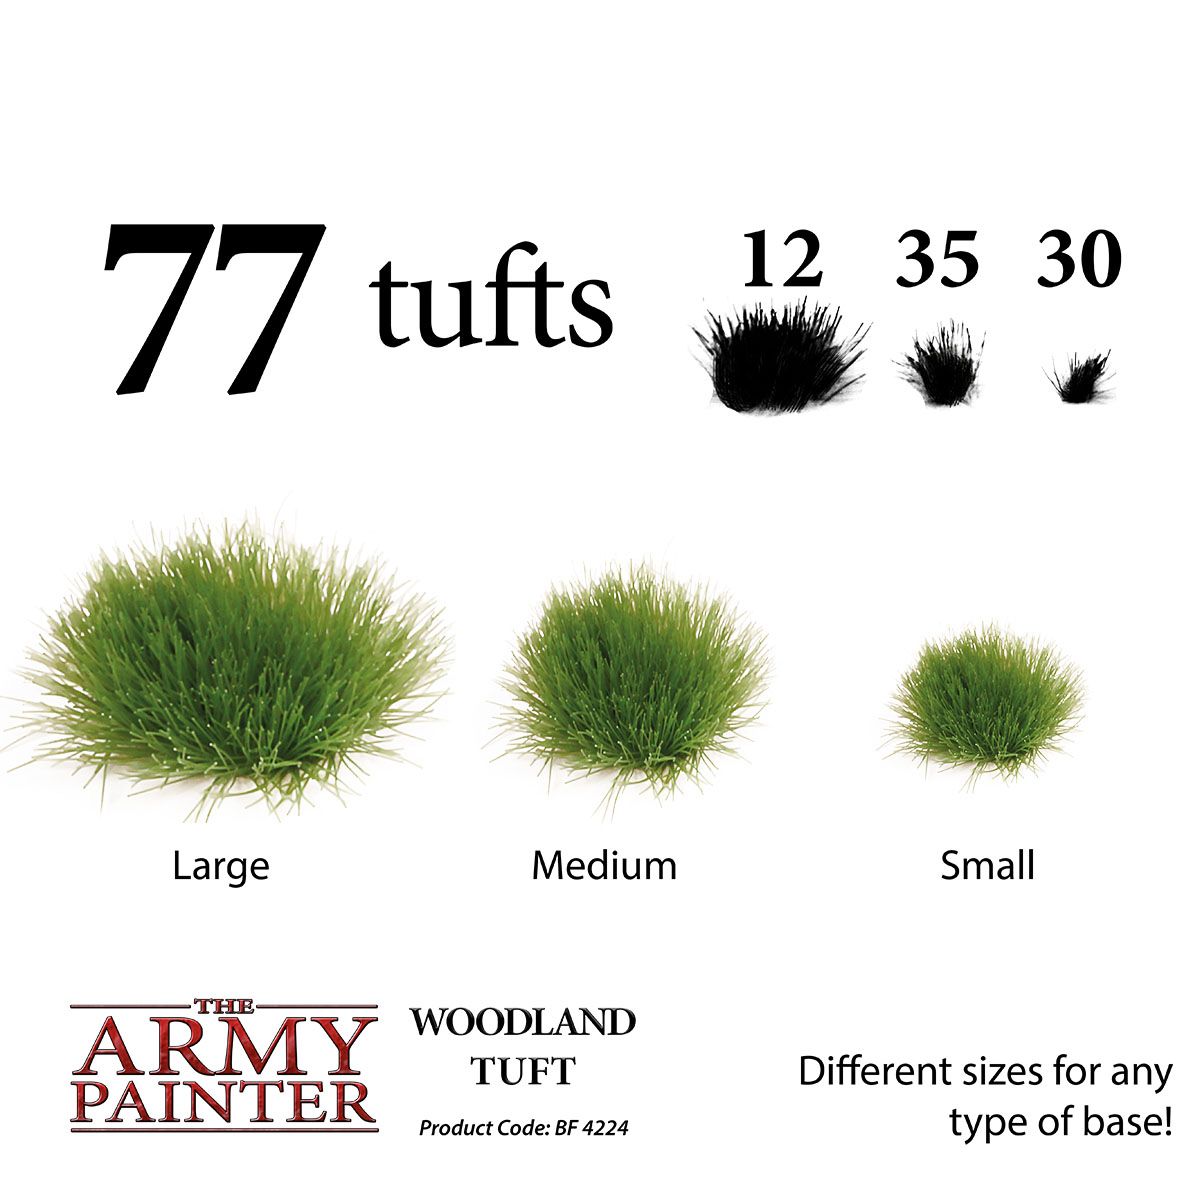 Woodland Tufts (The Army Painter)